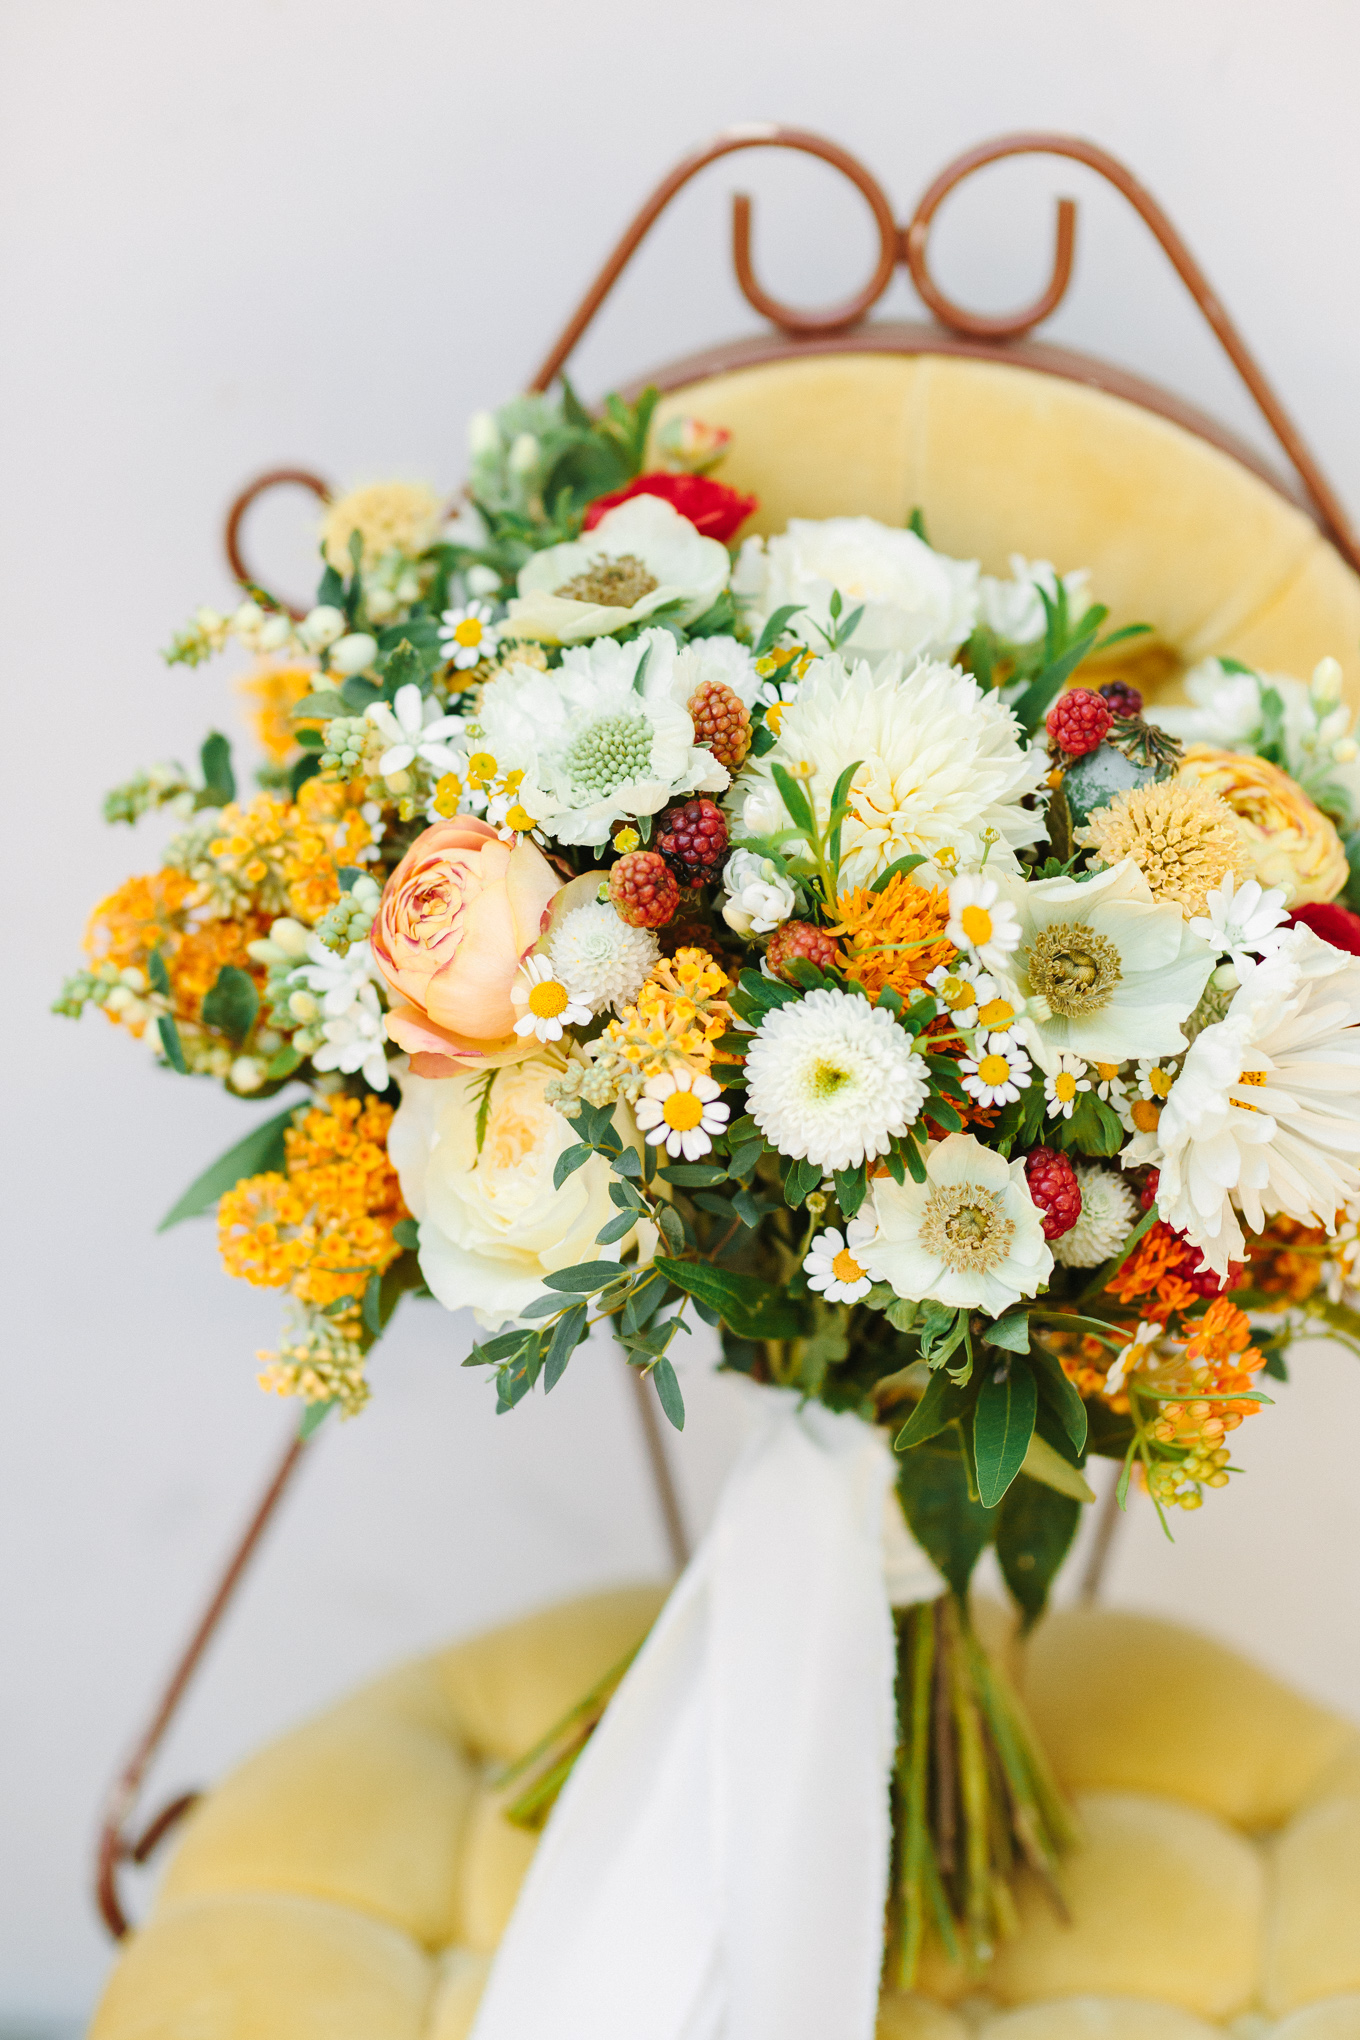 Whimsical autumn yellow, white and red bouquet | Beautiful bridal bouquet inspiration and advice | Colorful and elevated wedding photography for fun-loving couples in Southern California | #weddingflowers #weddingbouquet #bridebouquet #bouquetideas #uniquebouquet   Source: Mary Costa Photography | Los Angeles